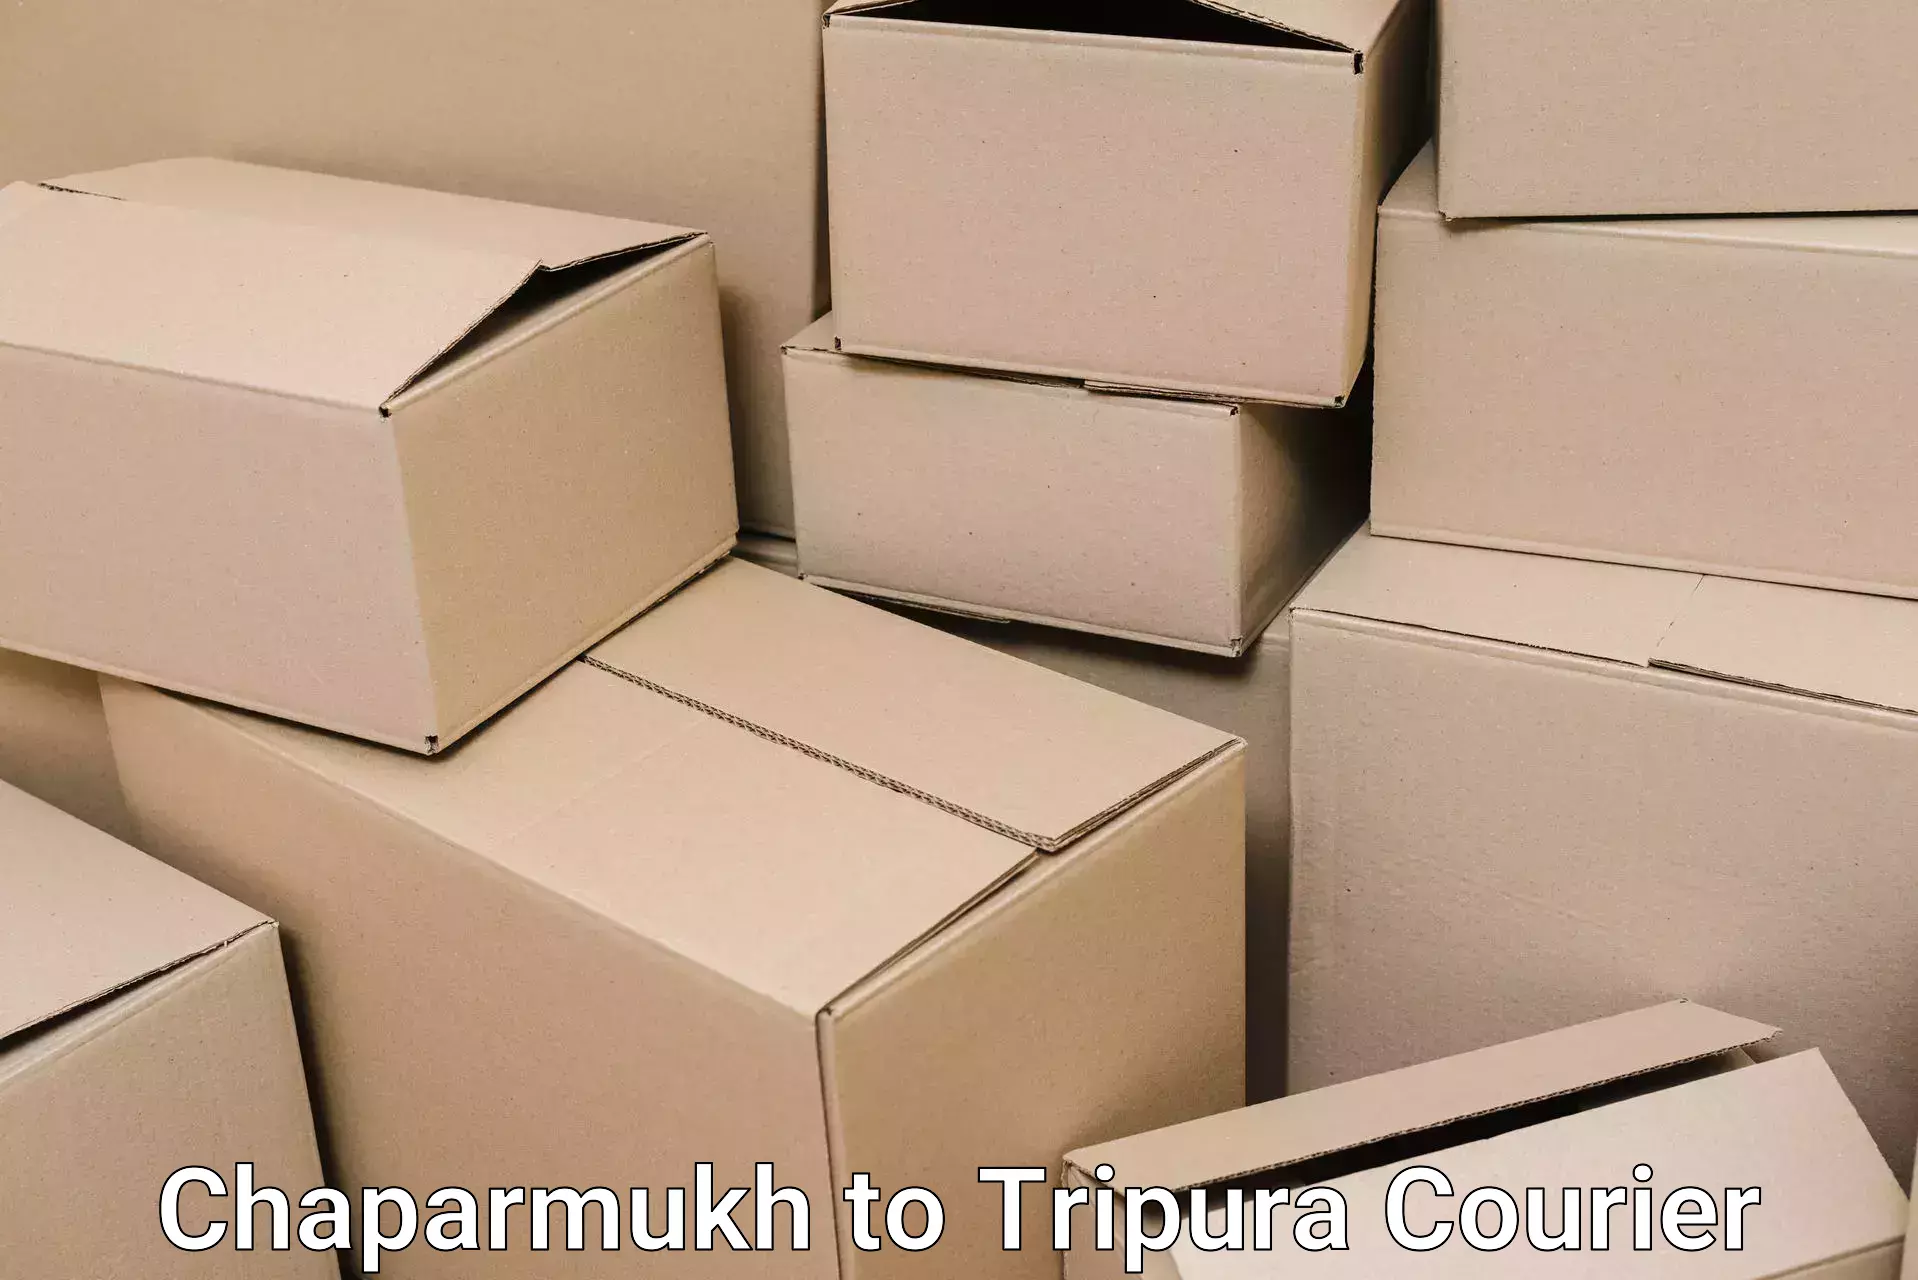 Furniture transport specialists Chaparmukh to Tripura